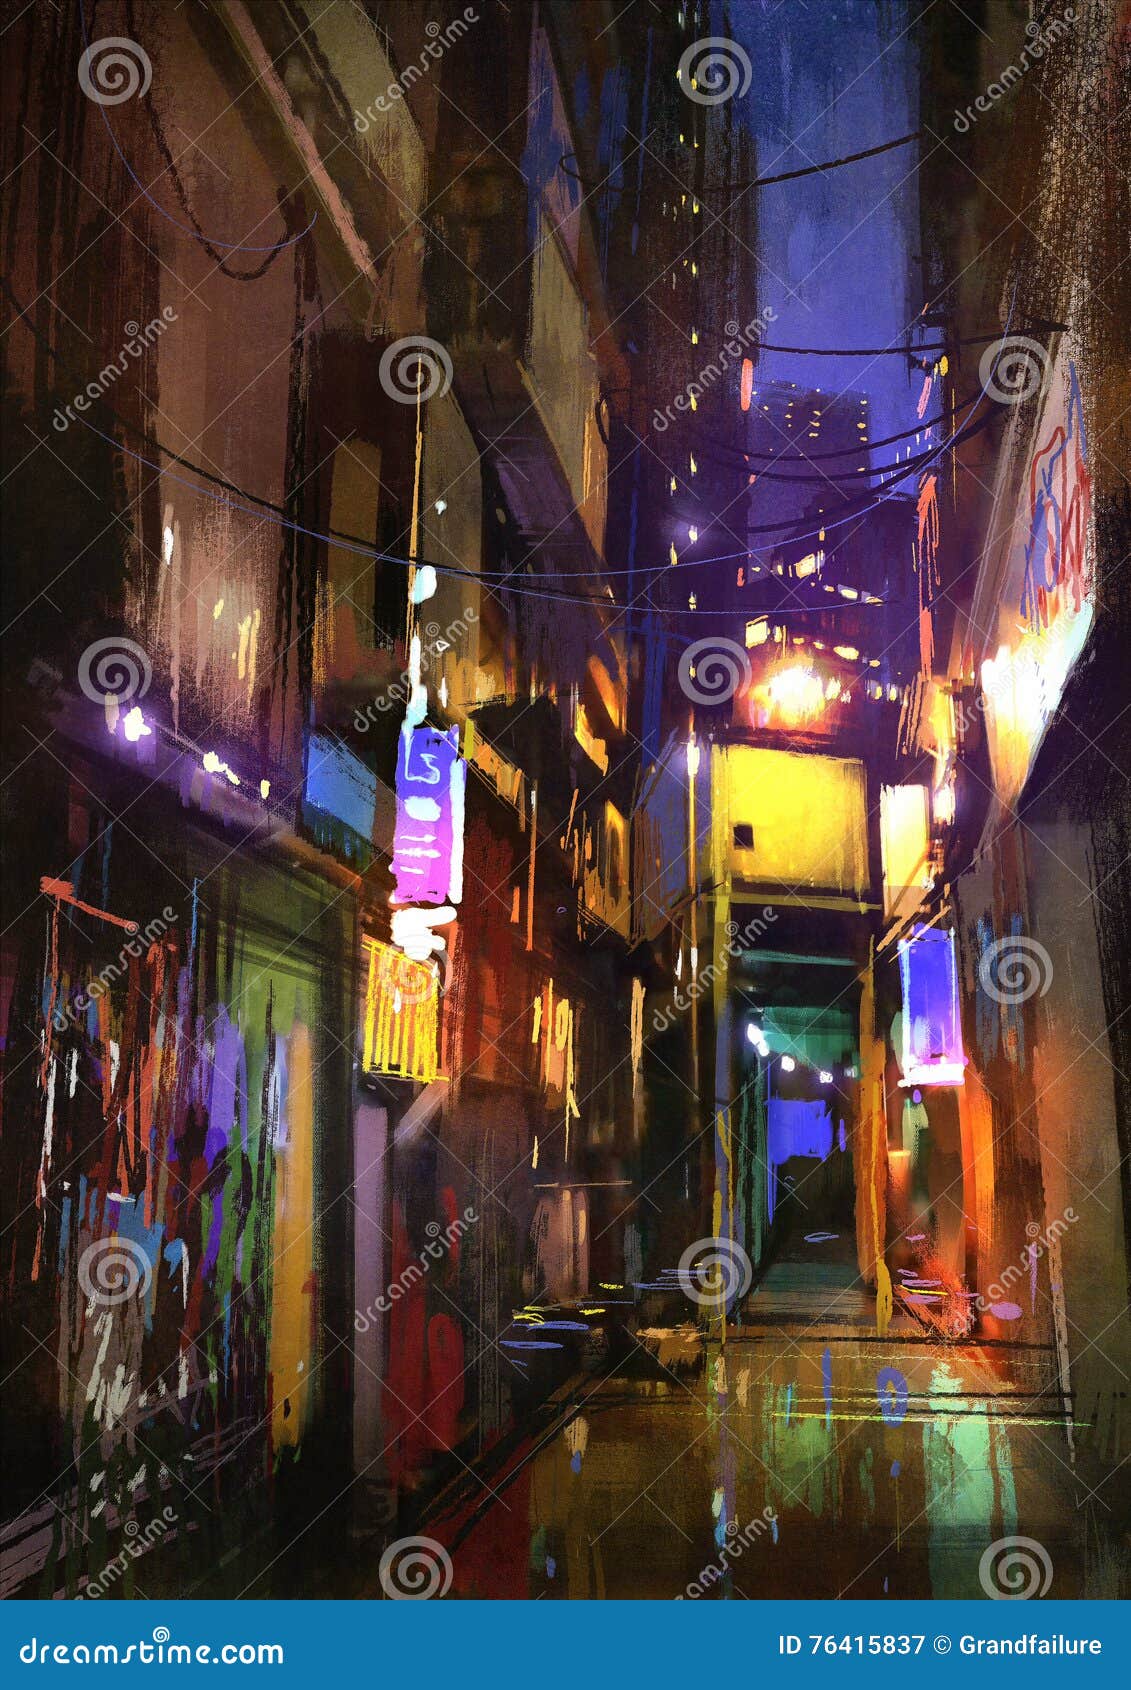 painting of dark alley at night